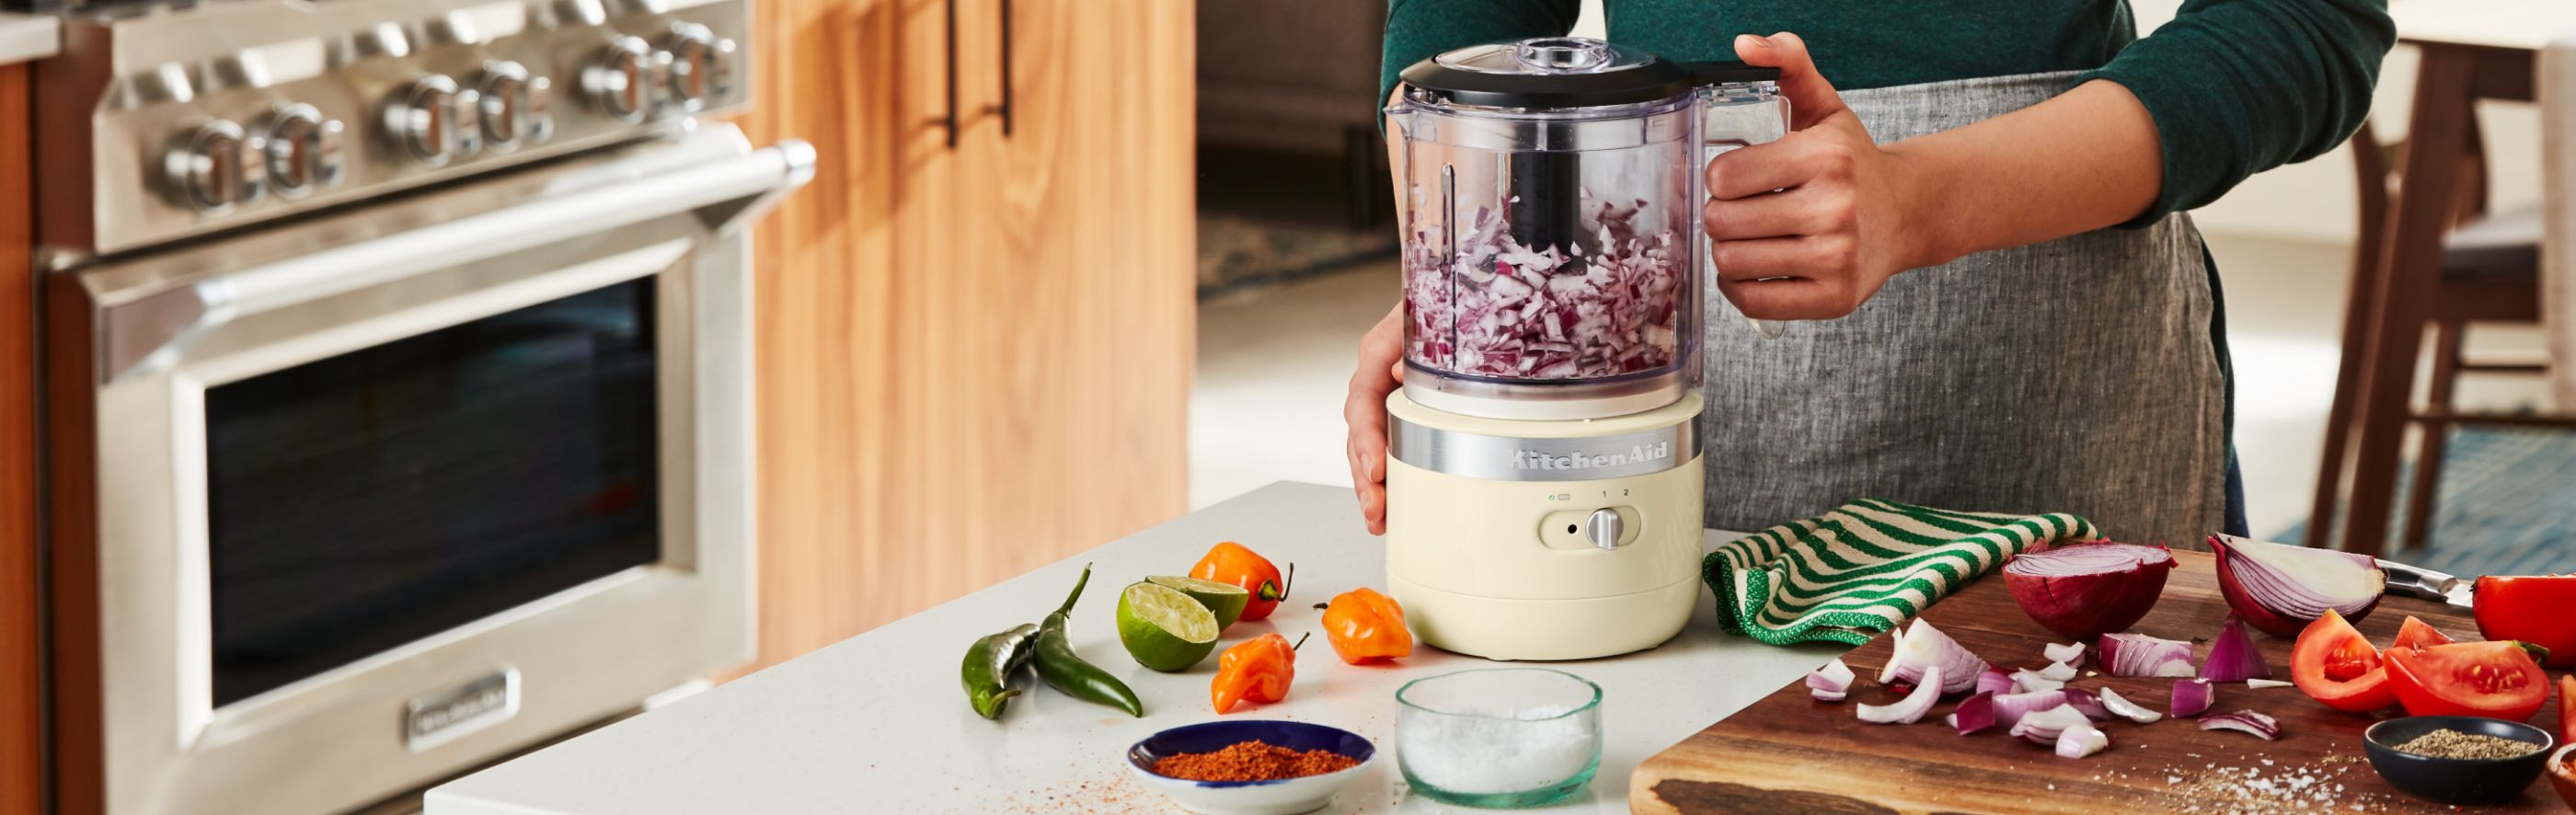 How To Dice Vegetables With A Food Processor